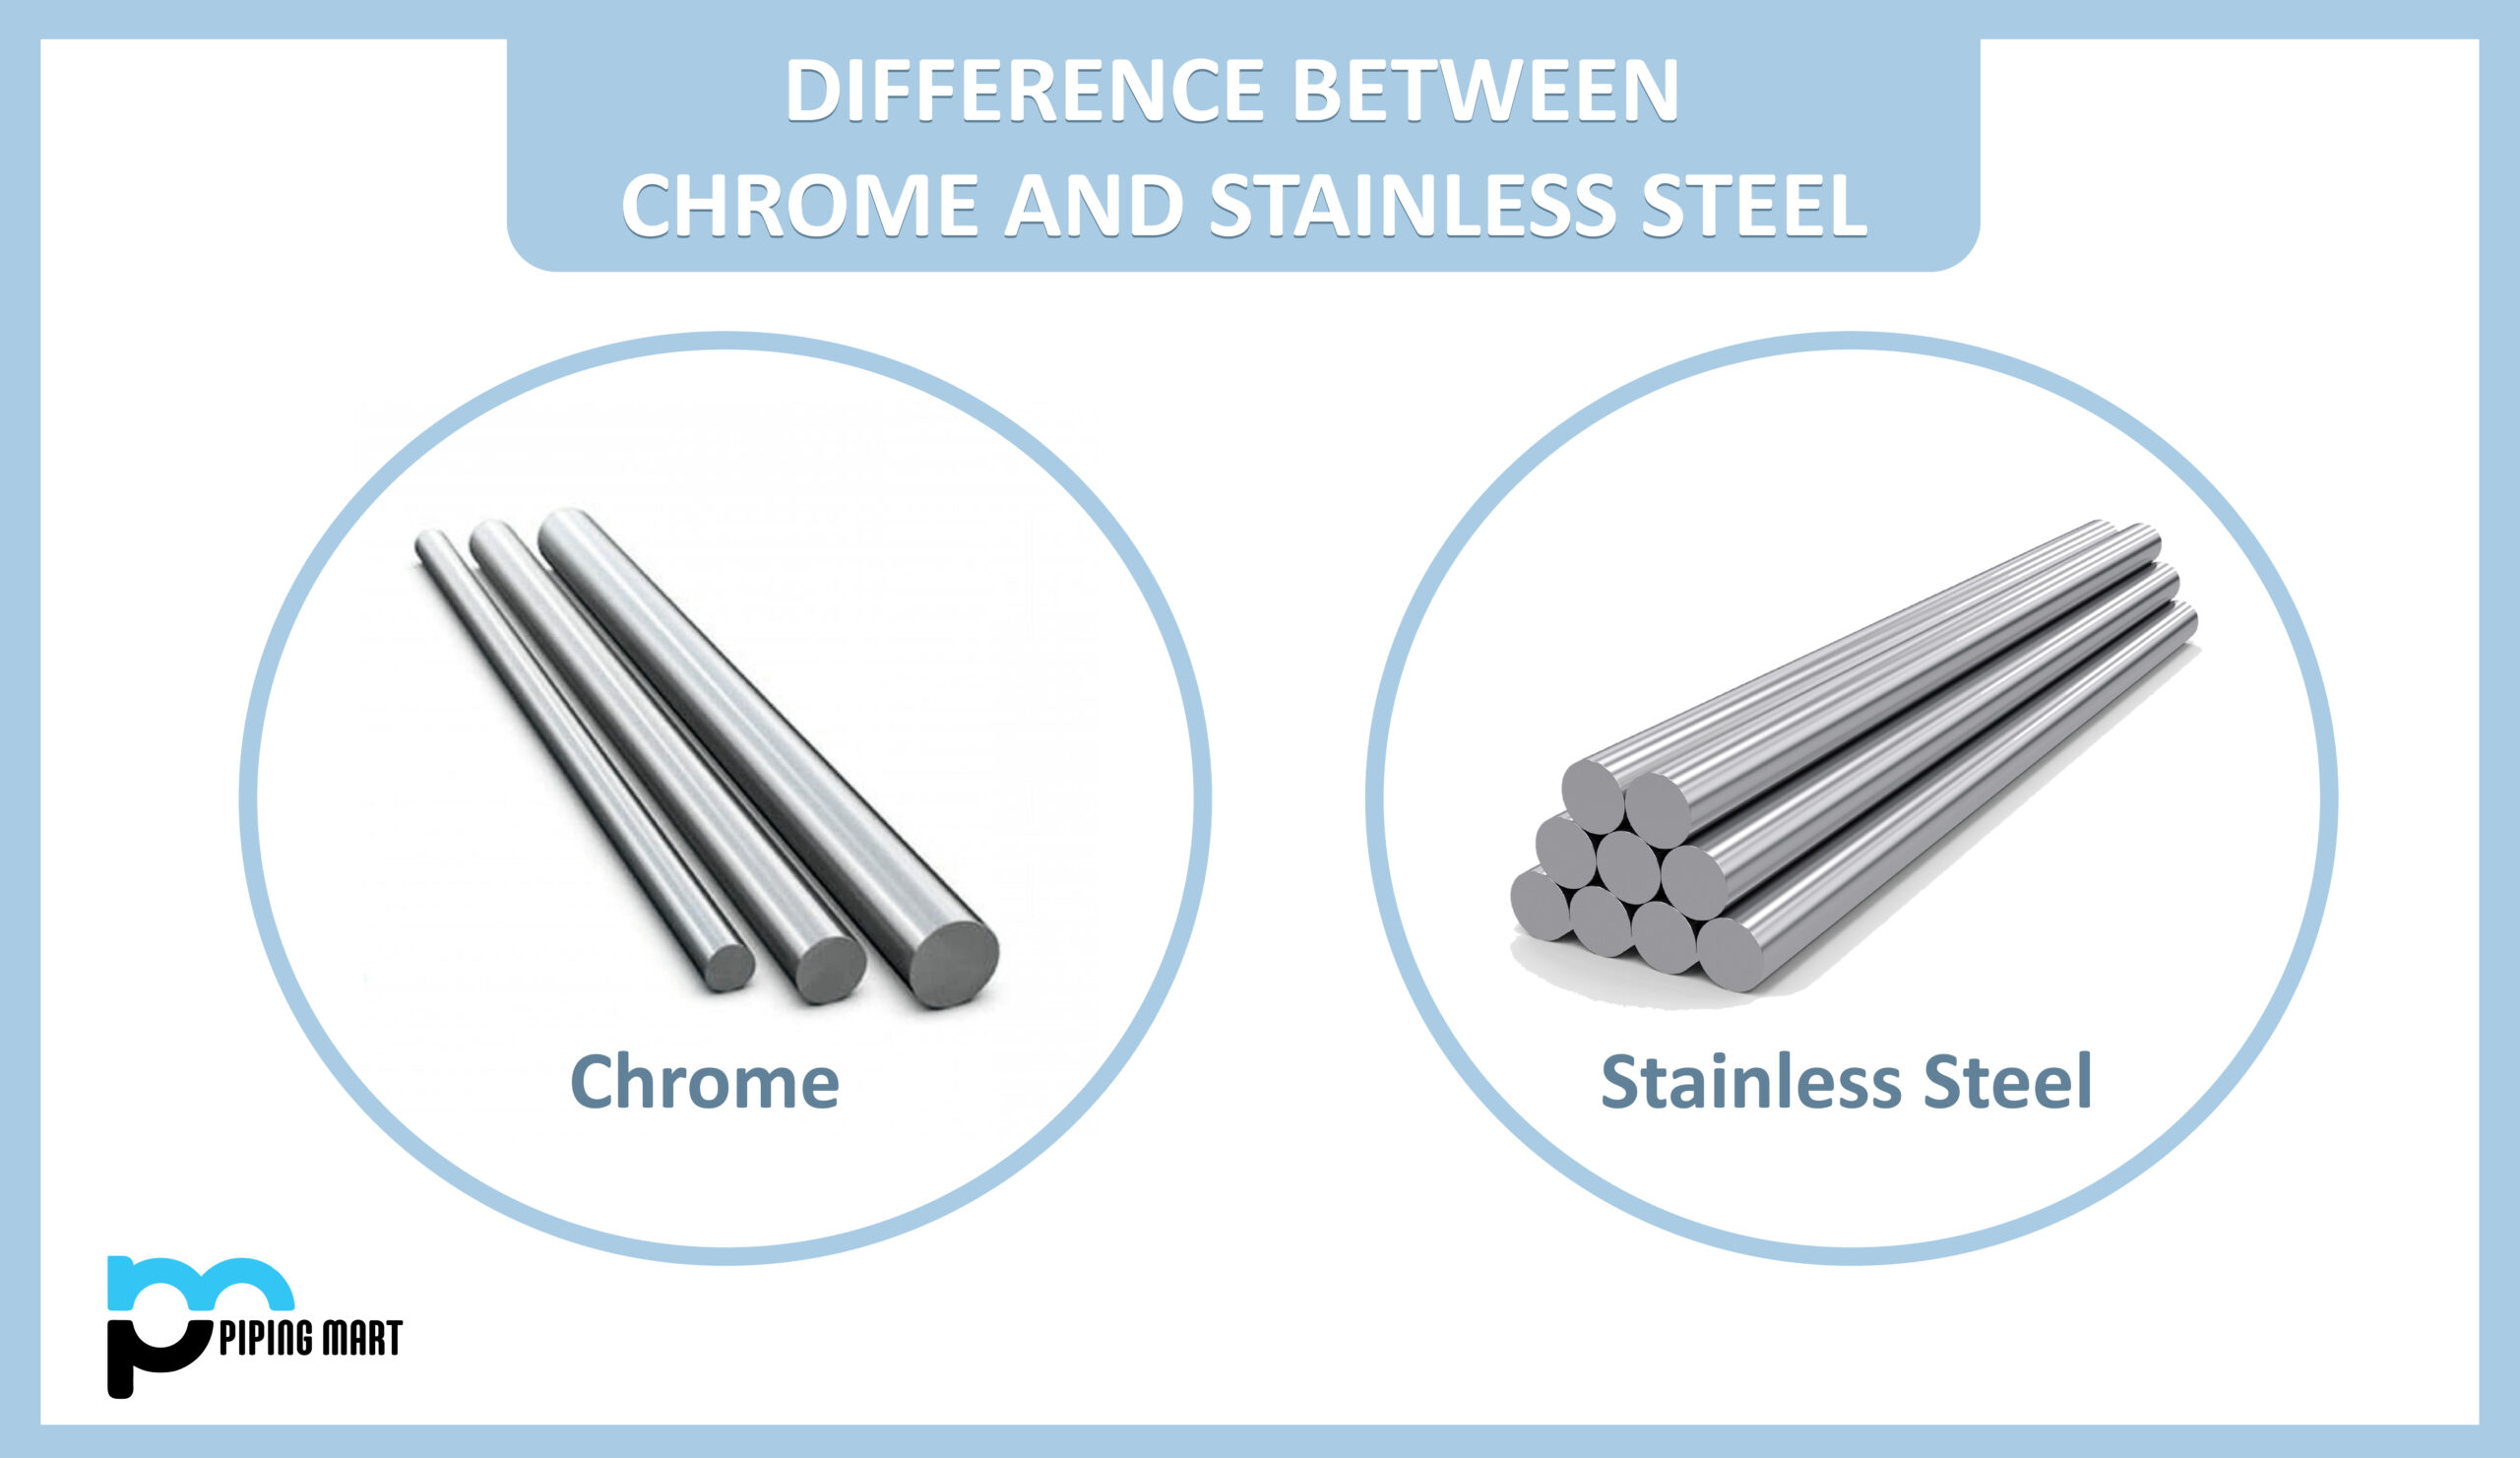 Differences between Steel and Stainless Steel